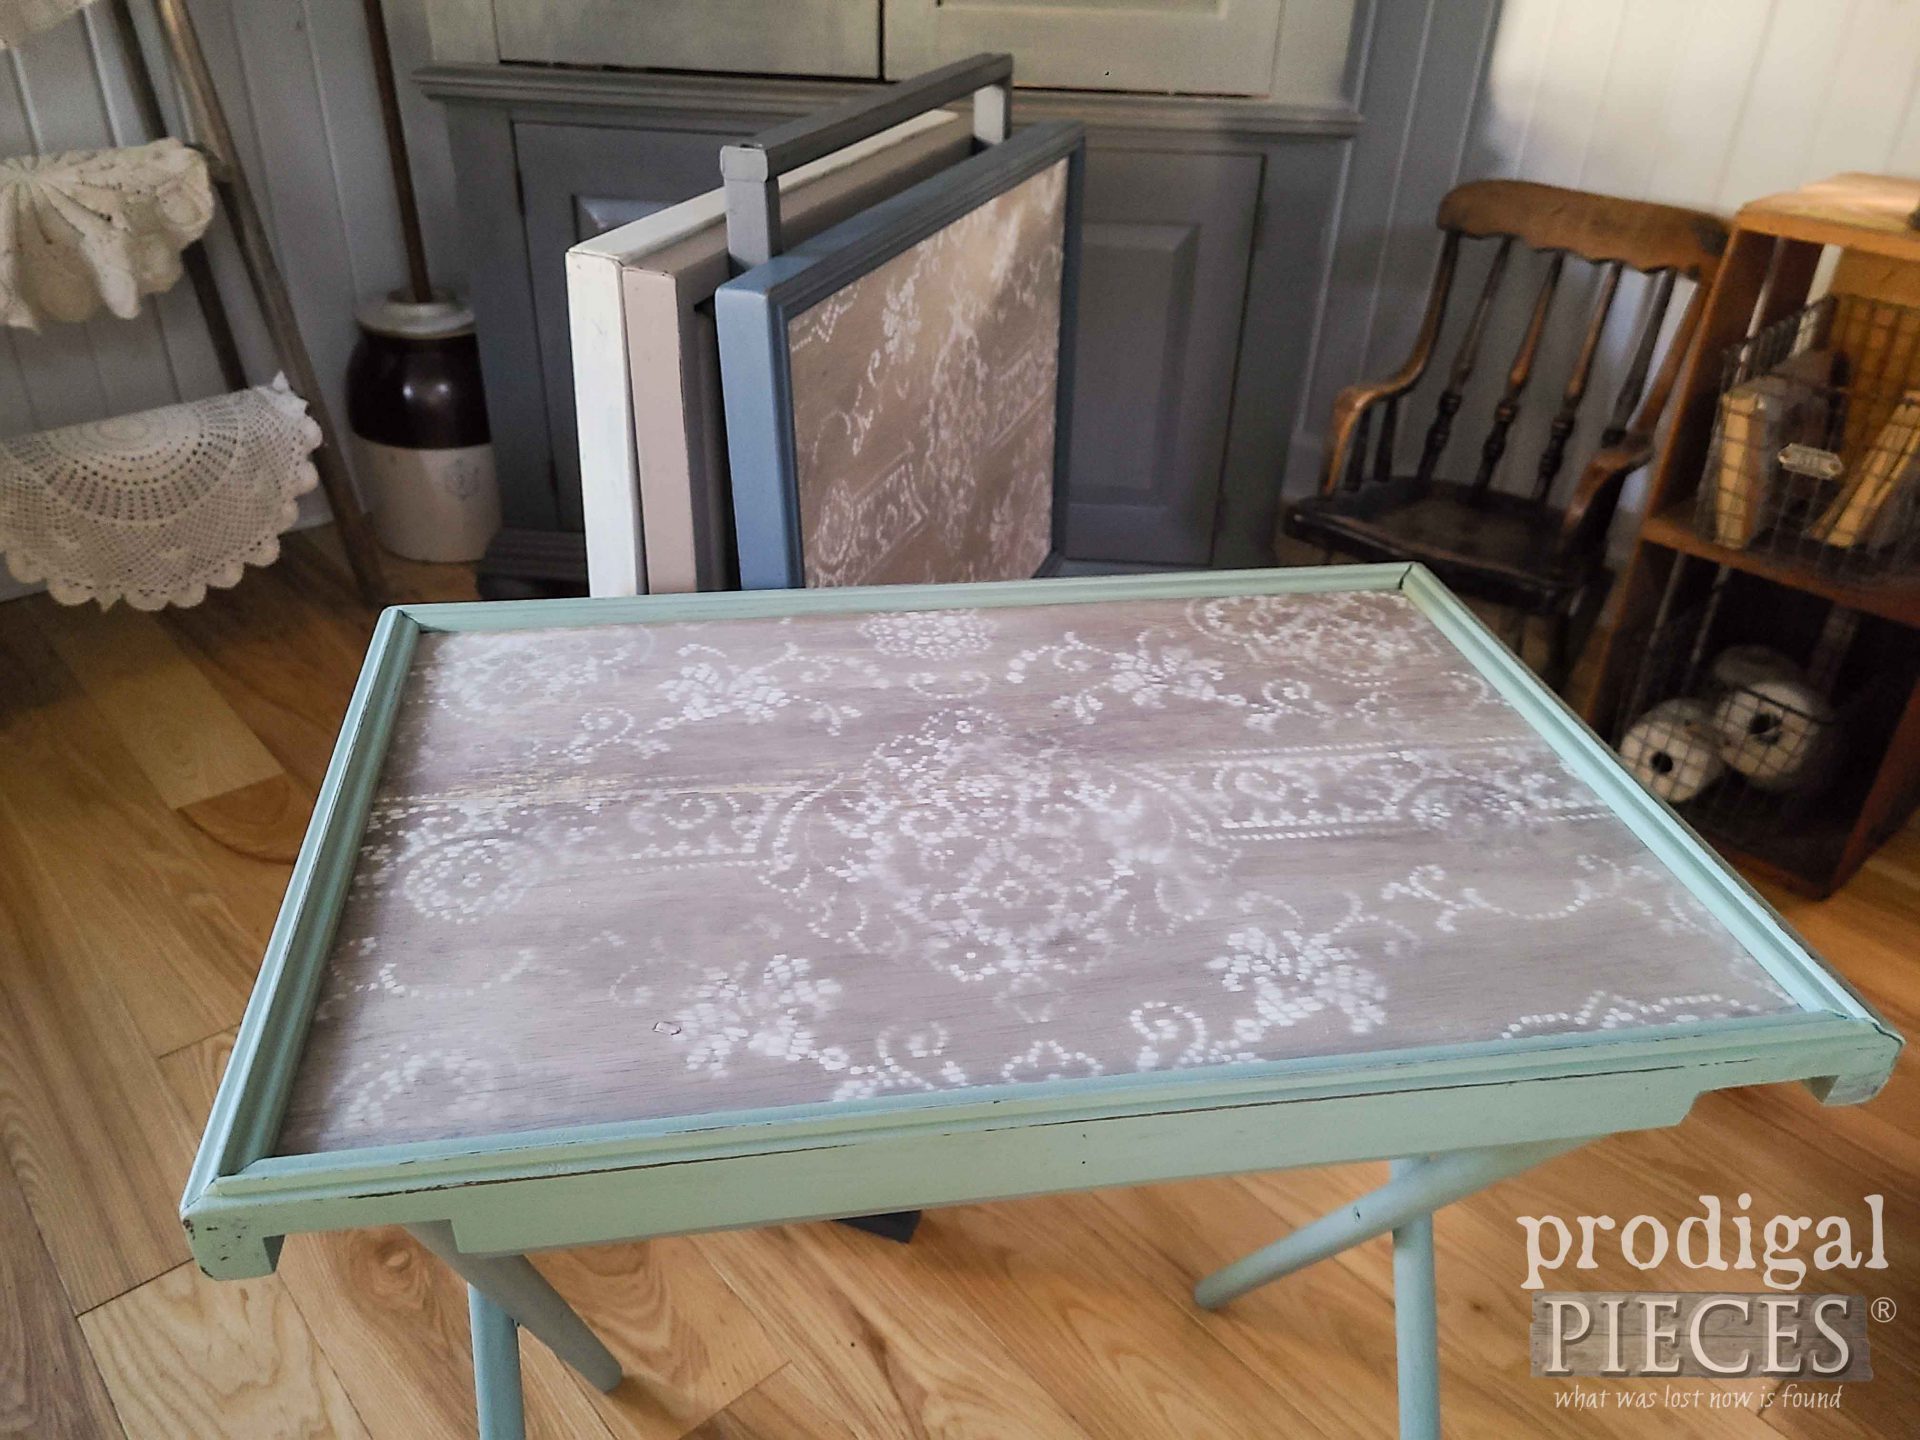 Closeup of Vintage TV Tray with Lace Stenciling Design by Larissa of Prodigal Pieces | prodigalpieces.com #prodigalpieces #tv #tray #home